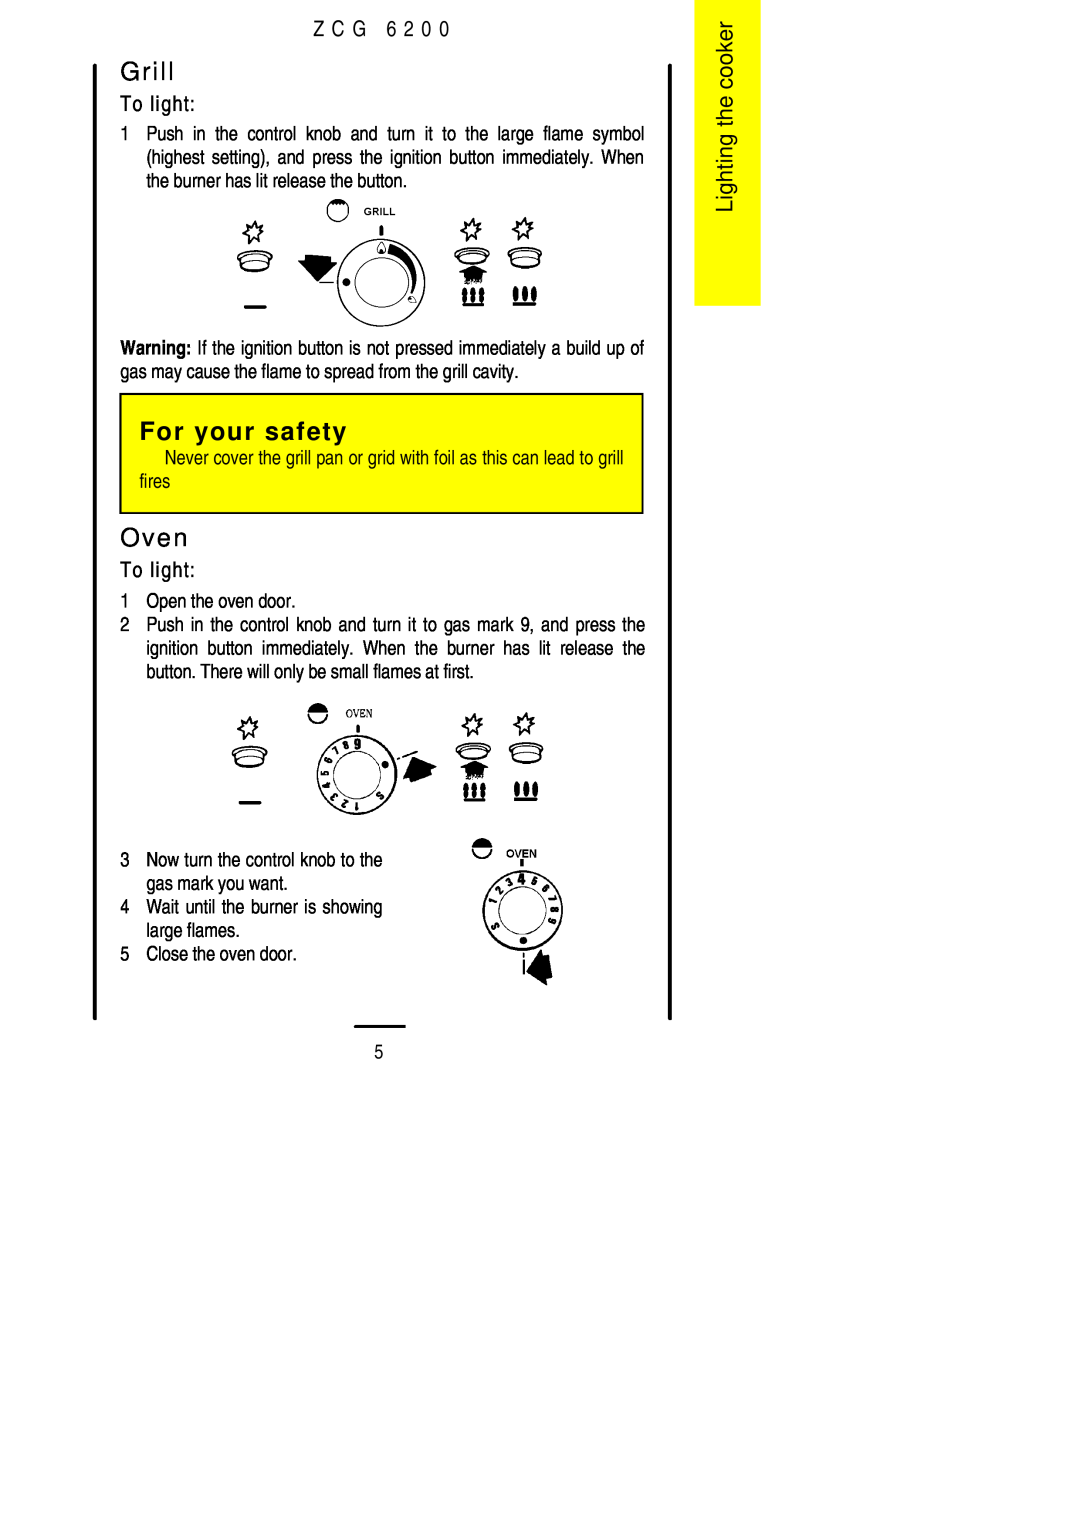 Zanussi ZCG 6200 installation instructions Grill, Oven, For your safety, Lighting the cooker, Z C G, To light 